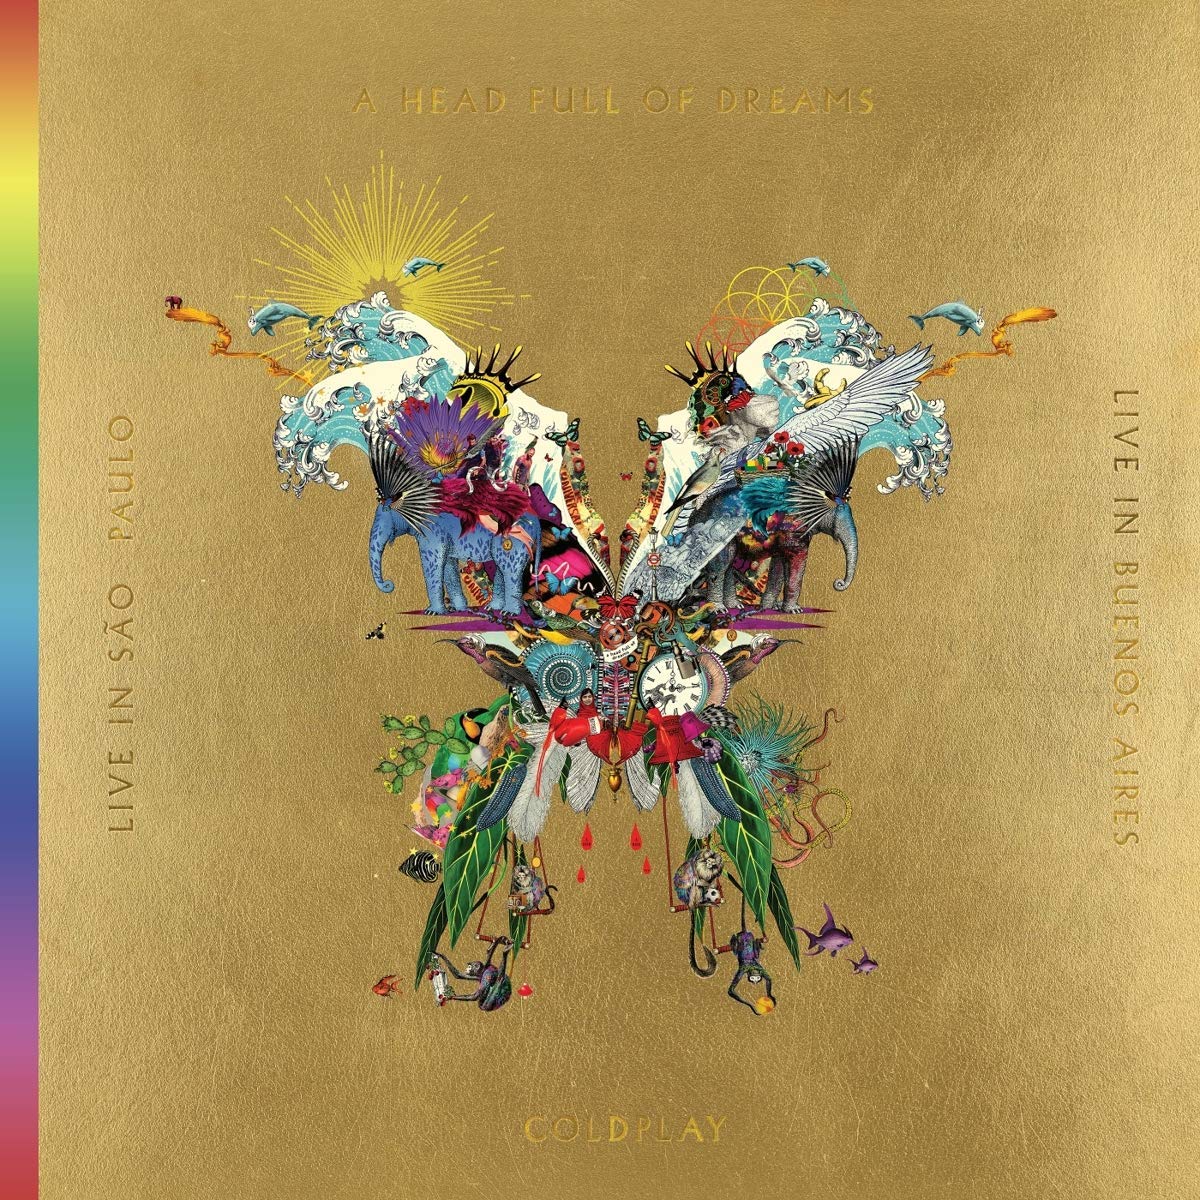 Coldplay - Live in Buenos Aires / Live in Sao Paulo / A head full of dreams